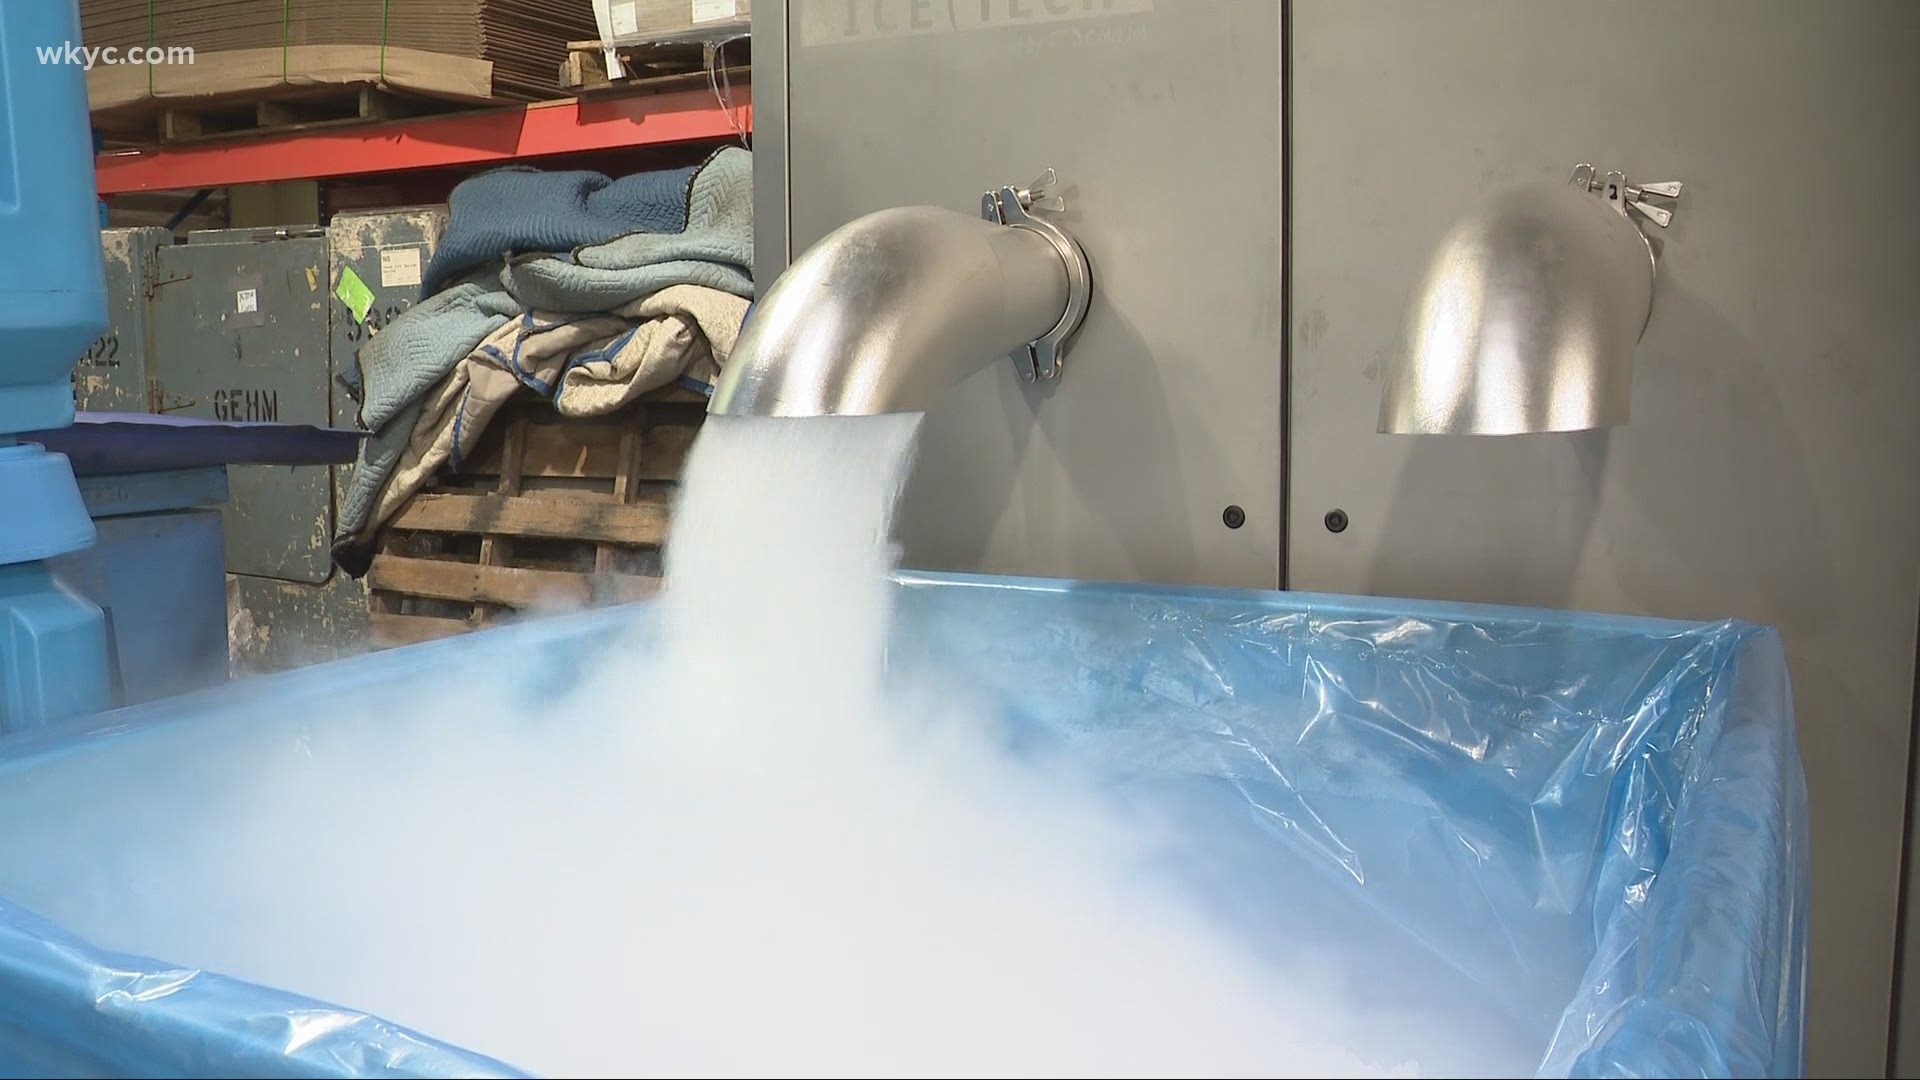 The company, founded more than 120 years ago, is now the sole manufacturer of dry ice in Northeast Ohio. Lynna Lai reports.